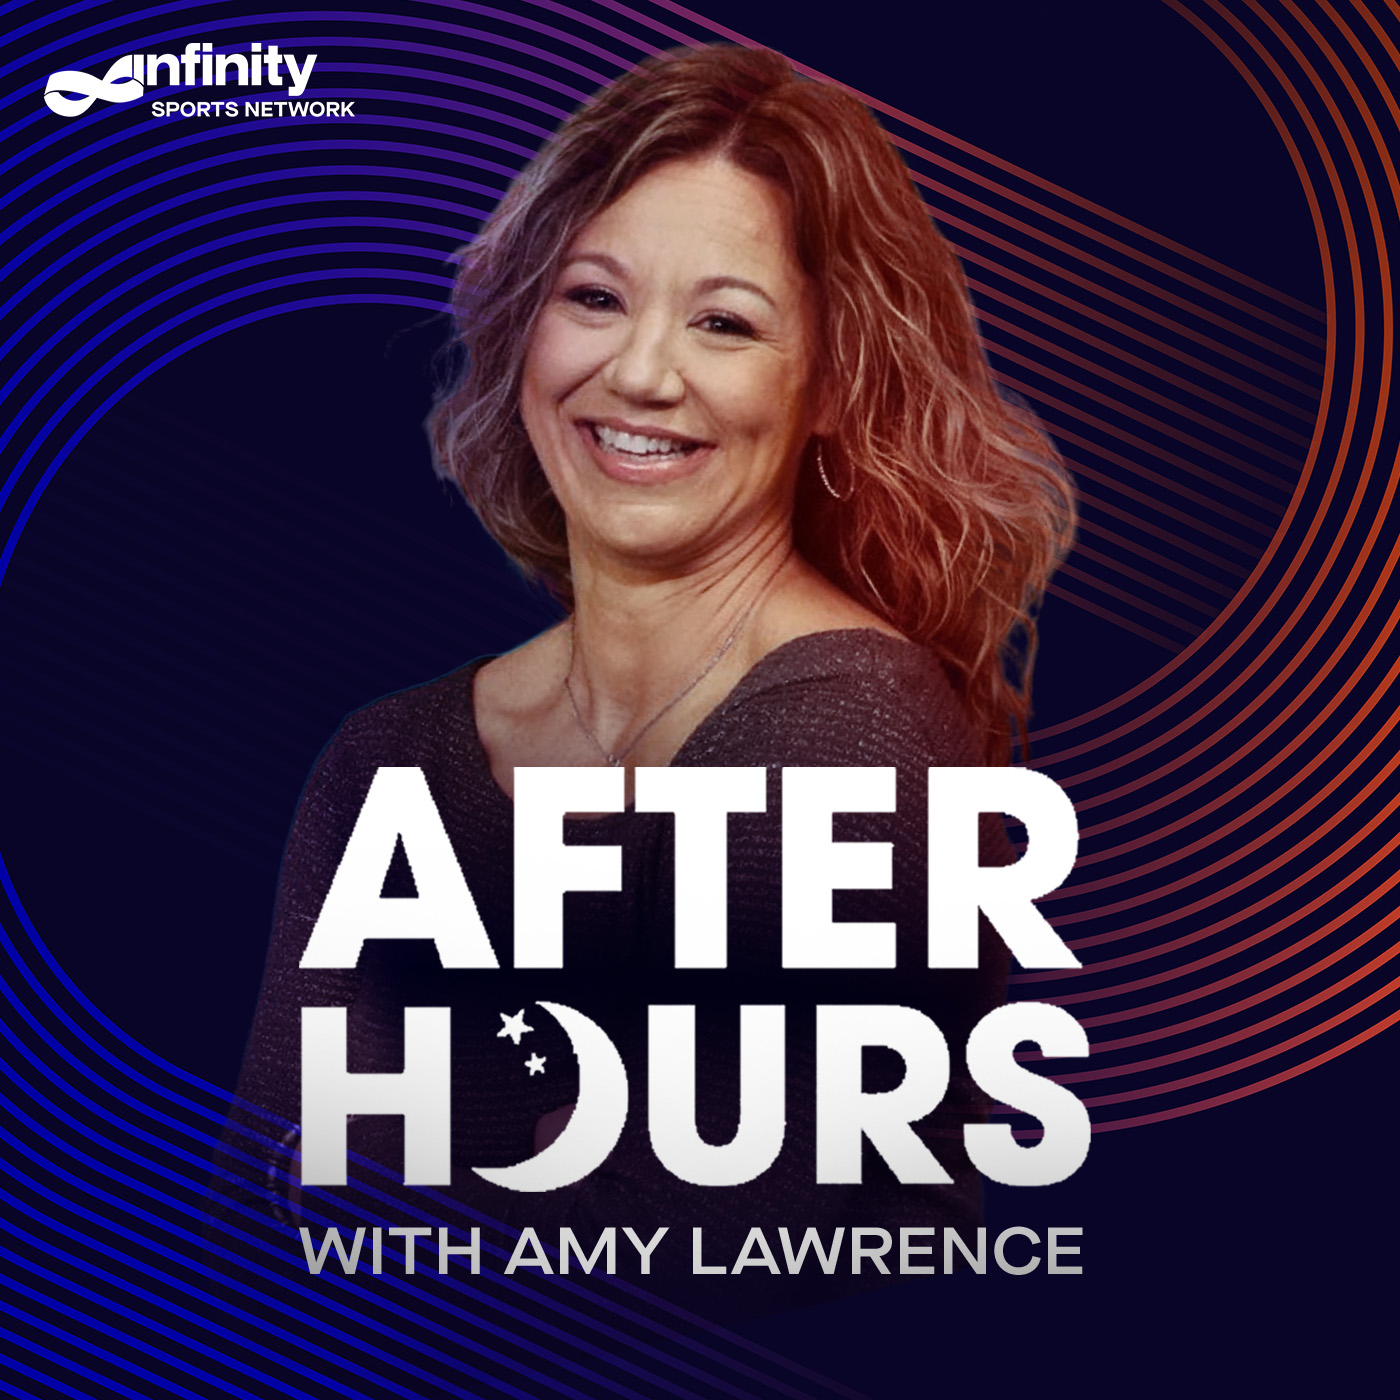 2-23-22 After Hours PODCAST: Hour 2